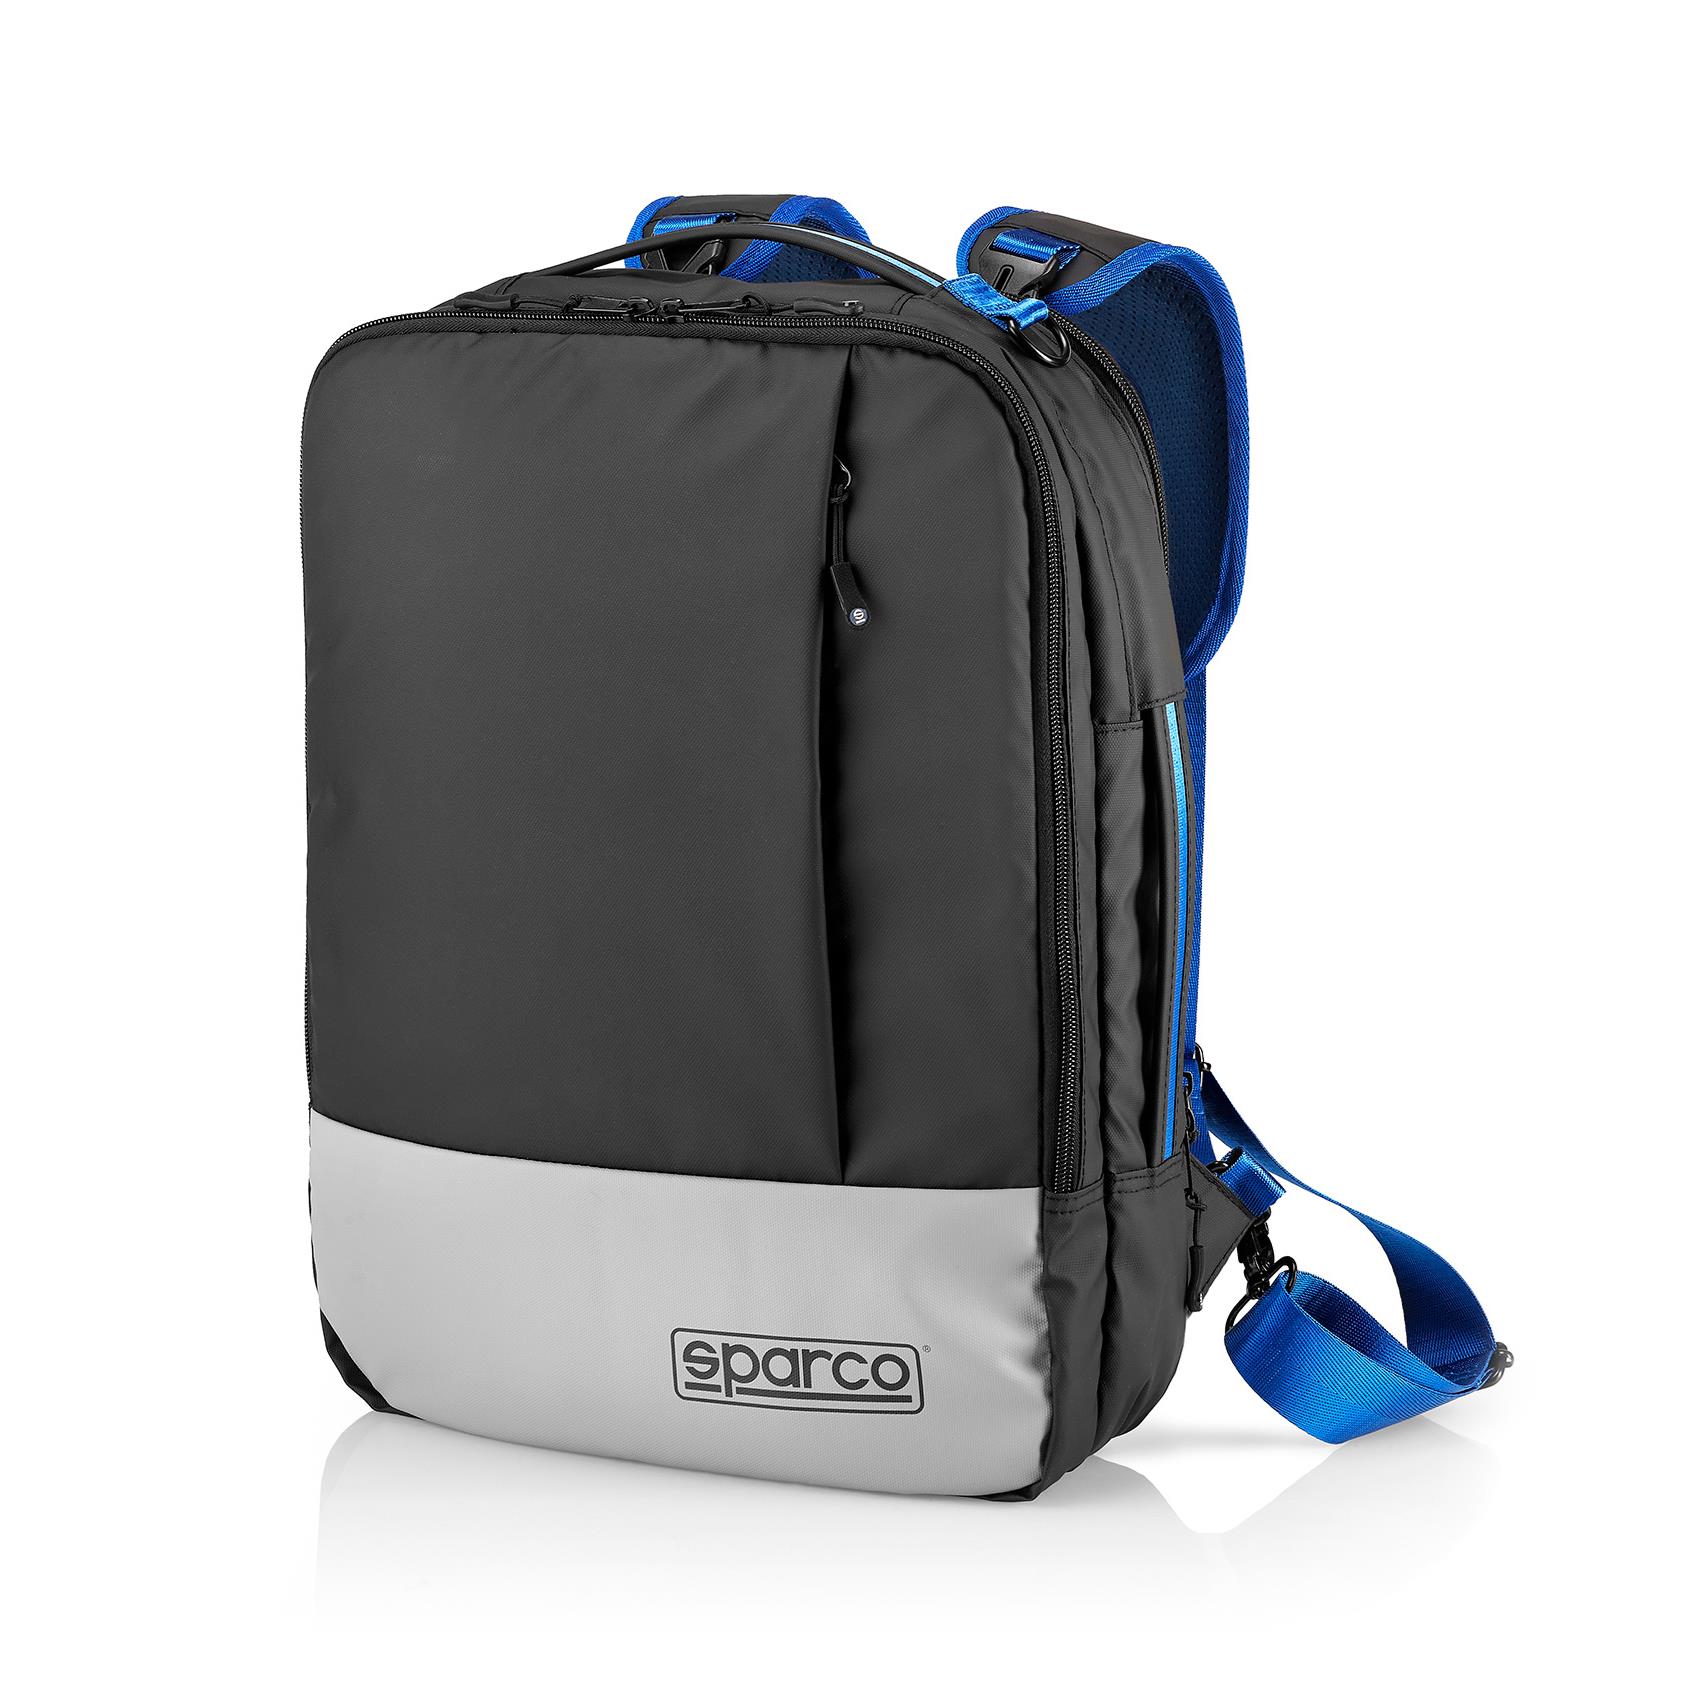 Sparco Backpack Fuel Celly Spbackpack 8052742554022